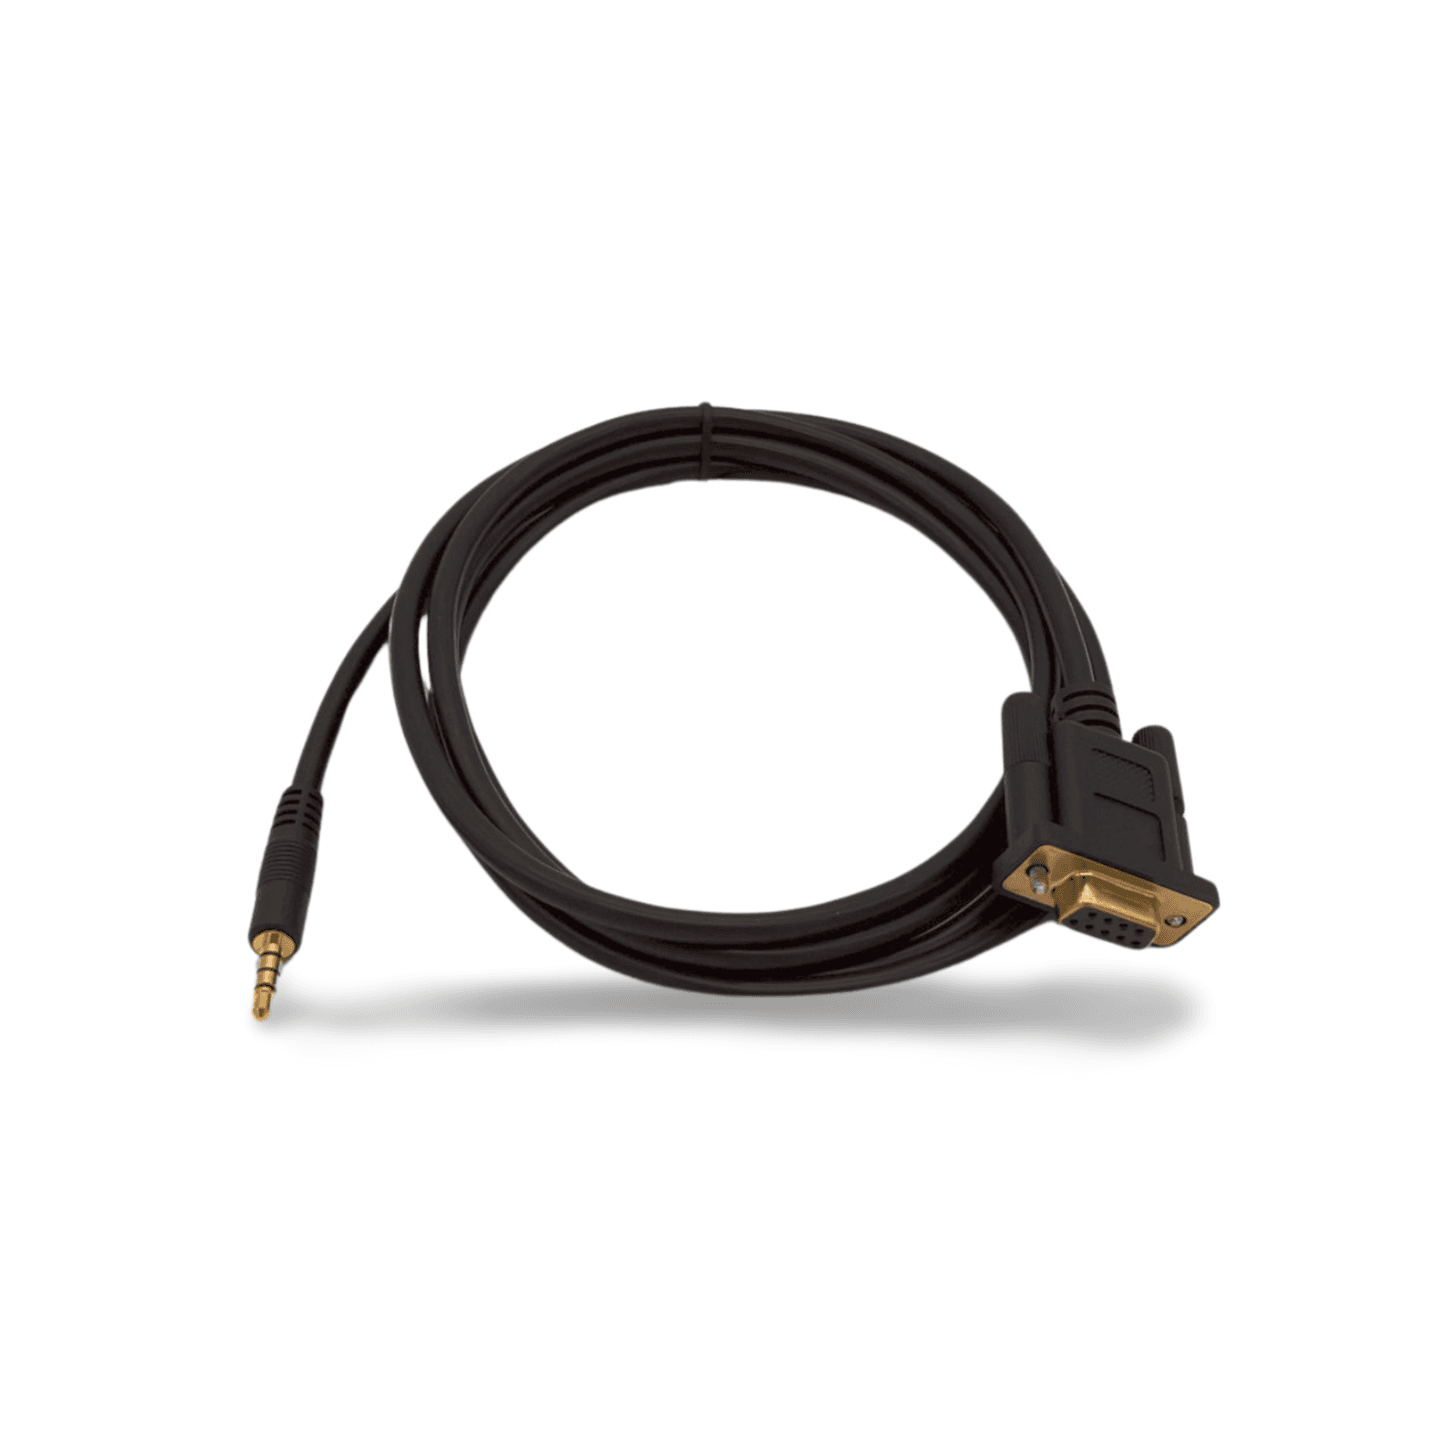 6ft DB9 Female to 3.5mm TRRS Serial Cable LG EAD 62707901 black